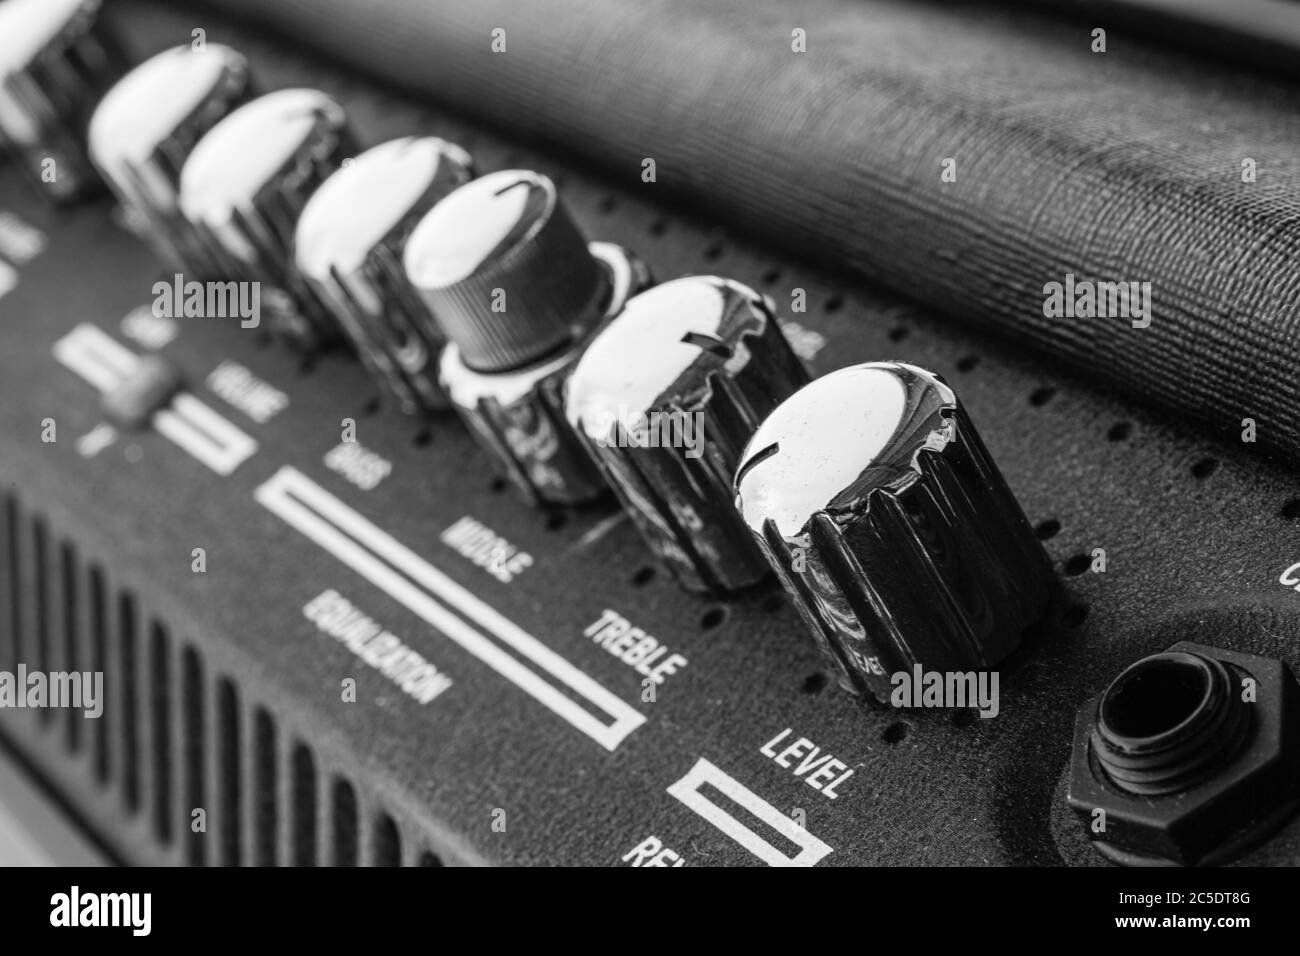 Guitar Amplifier Control Knobs. Sound equipment. Music concert. Details of the music amplifier. Stock Photo